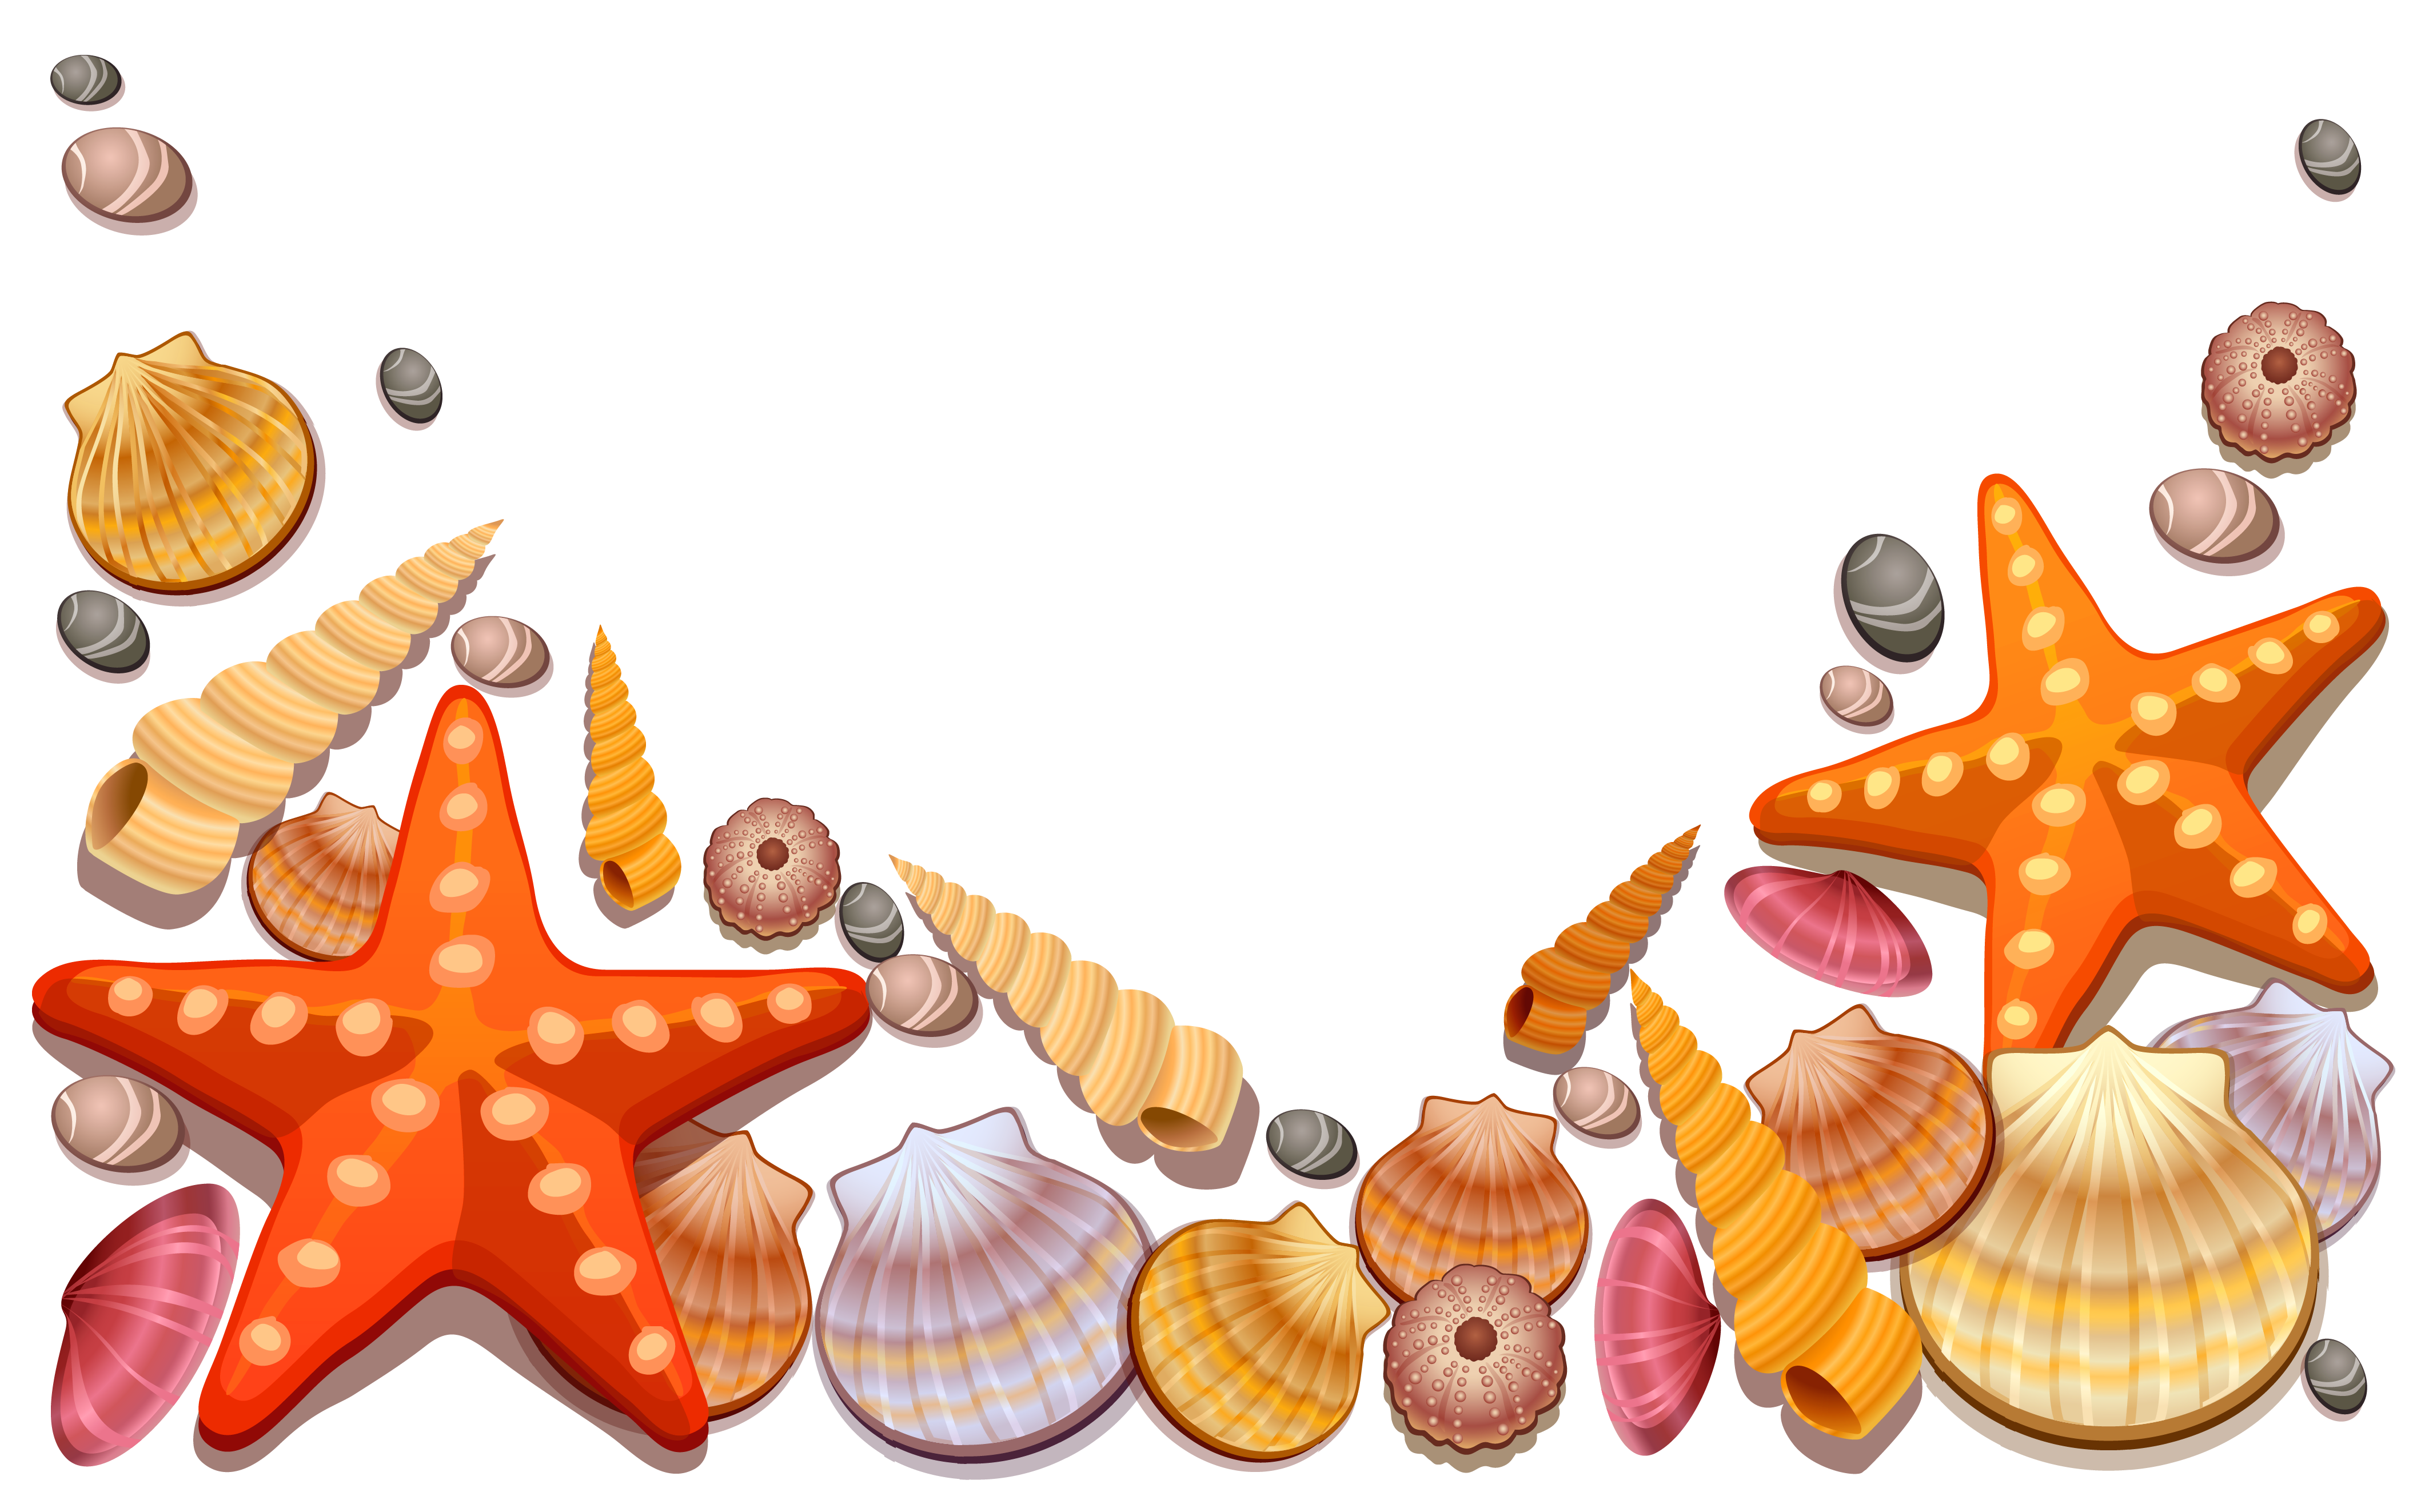 Sea shells at getdrawings. Shell clipart red clipart